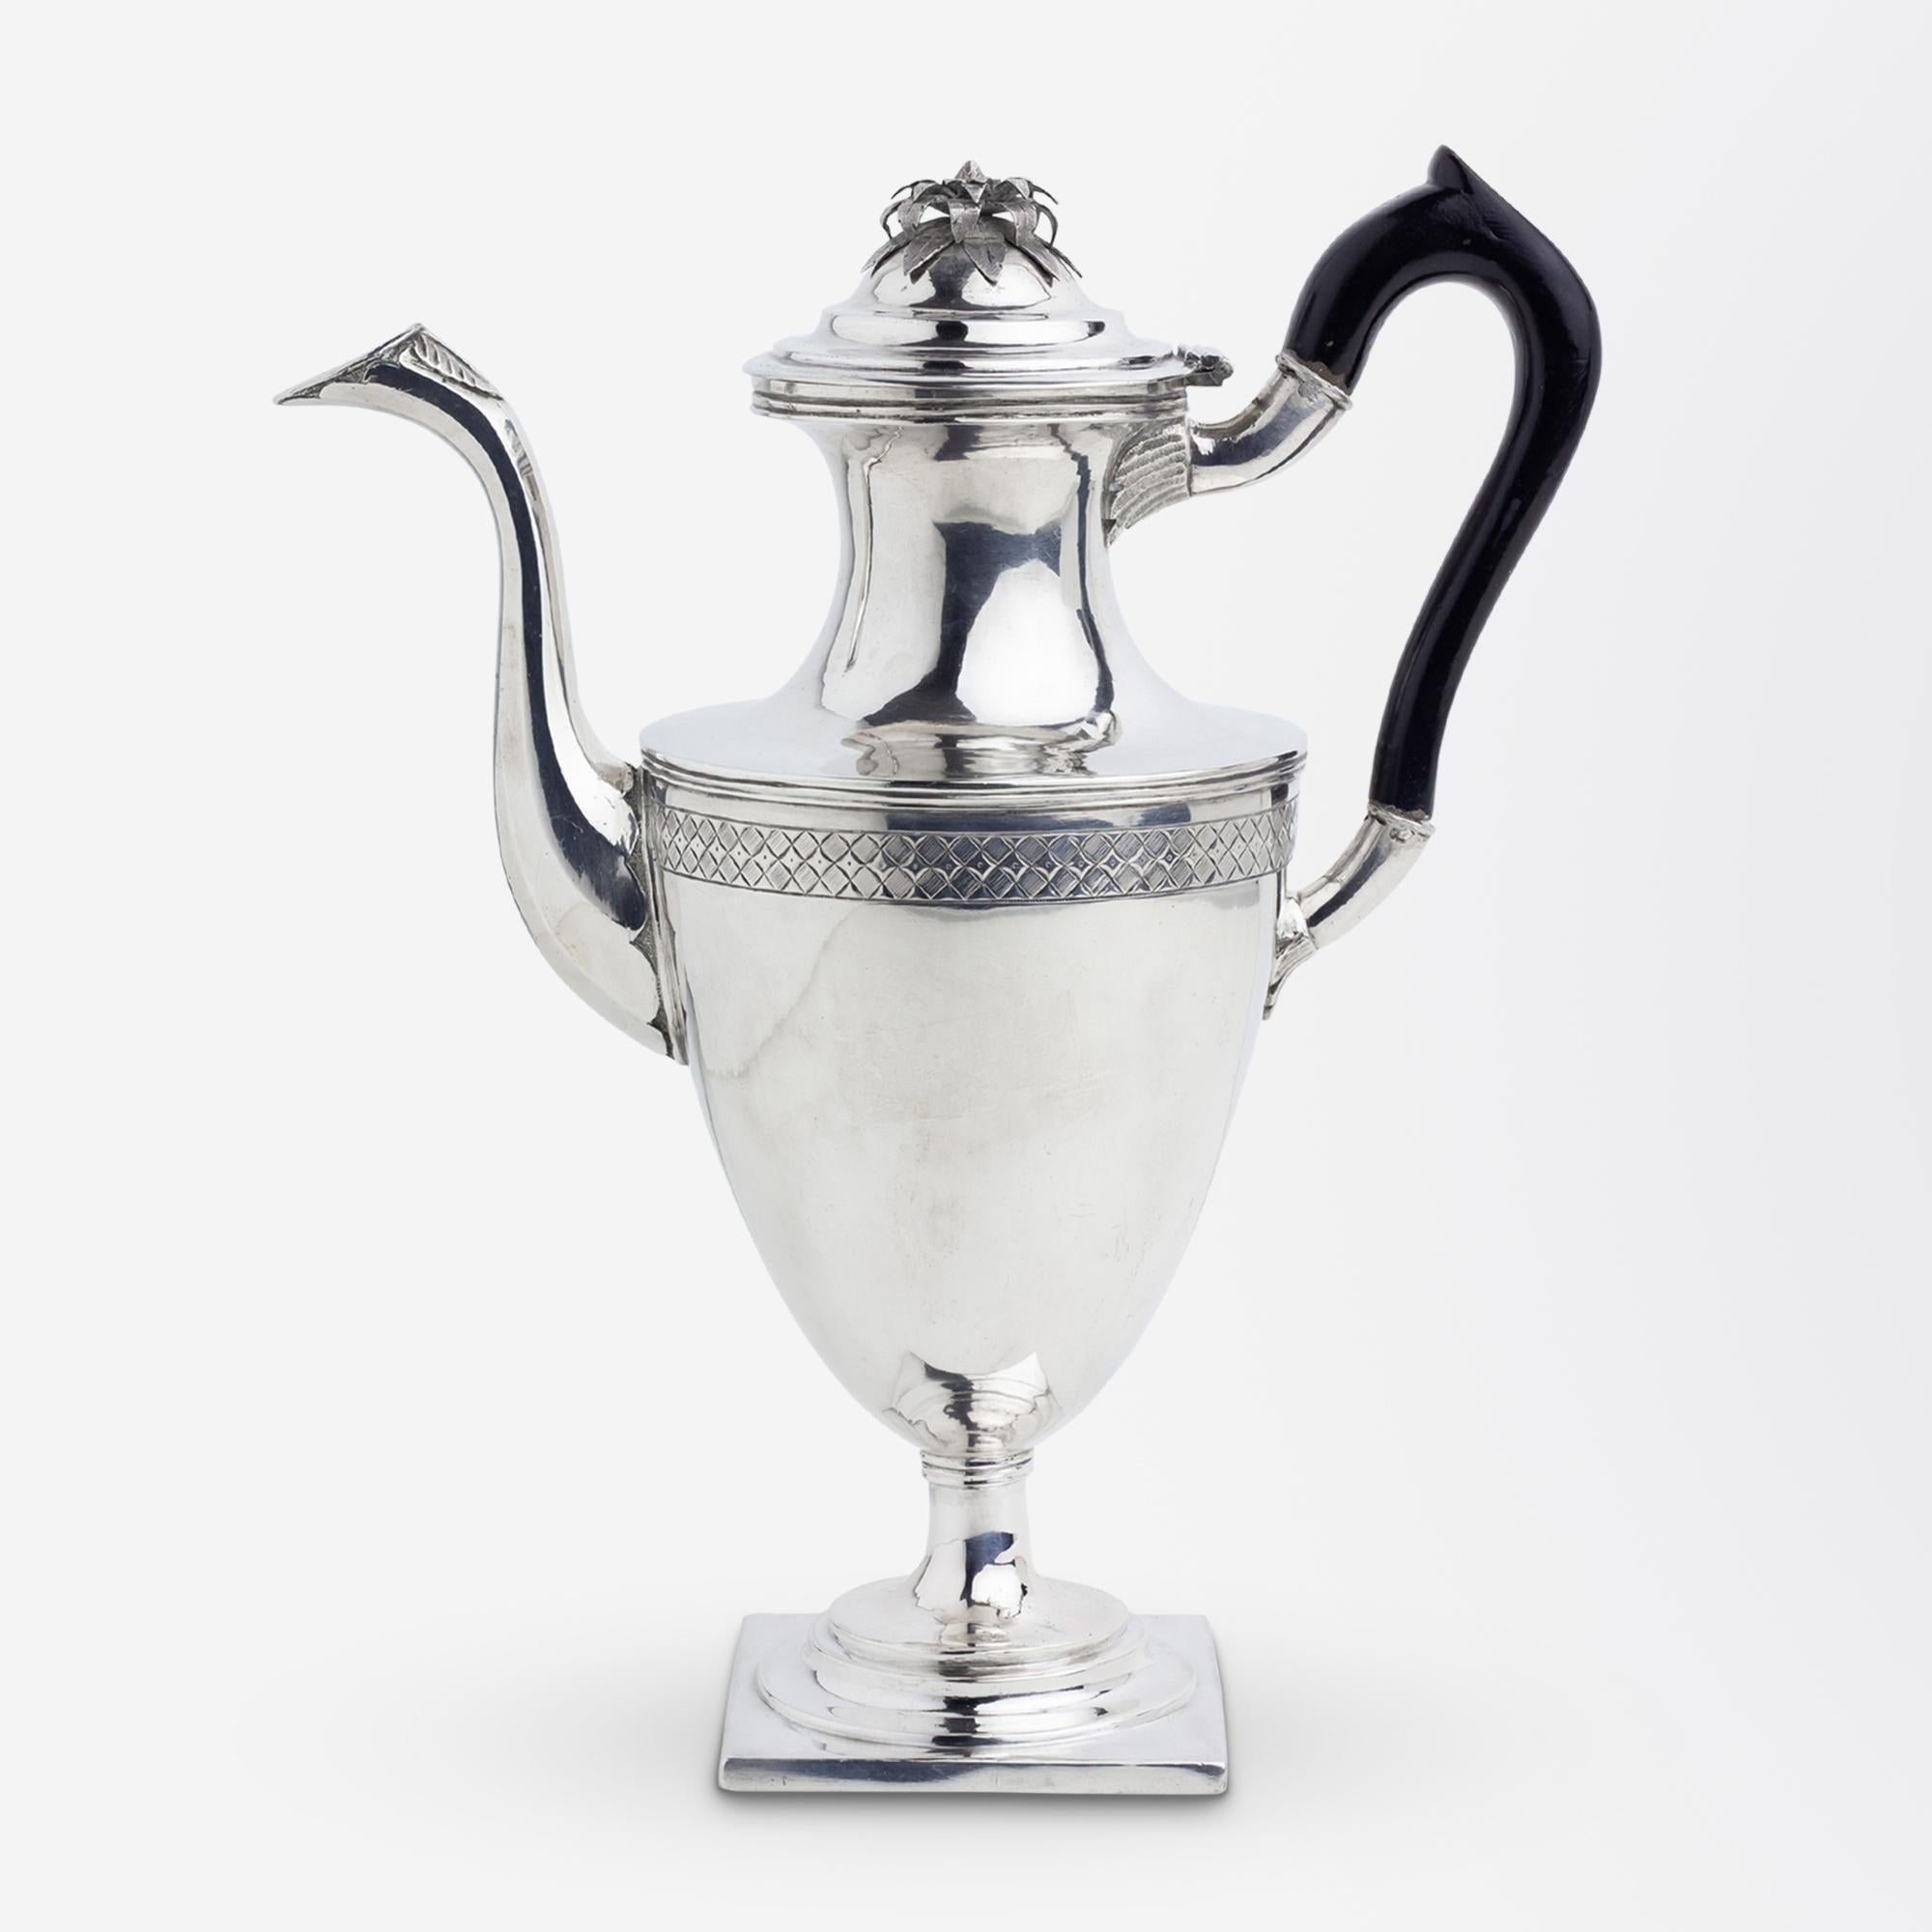 This rather elegant coffee pot was likely made in the United States during the second half of the 18th Century. Prior to restoration work in 2022 the underside of the pot had remnants of a hallmark 'NH', allowing us to attribute the piece to early